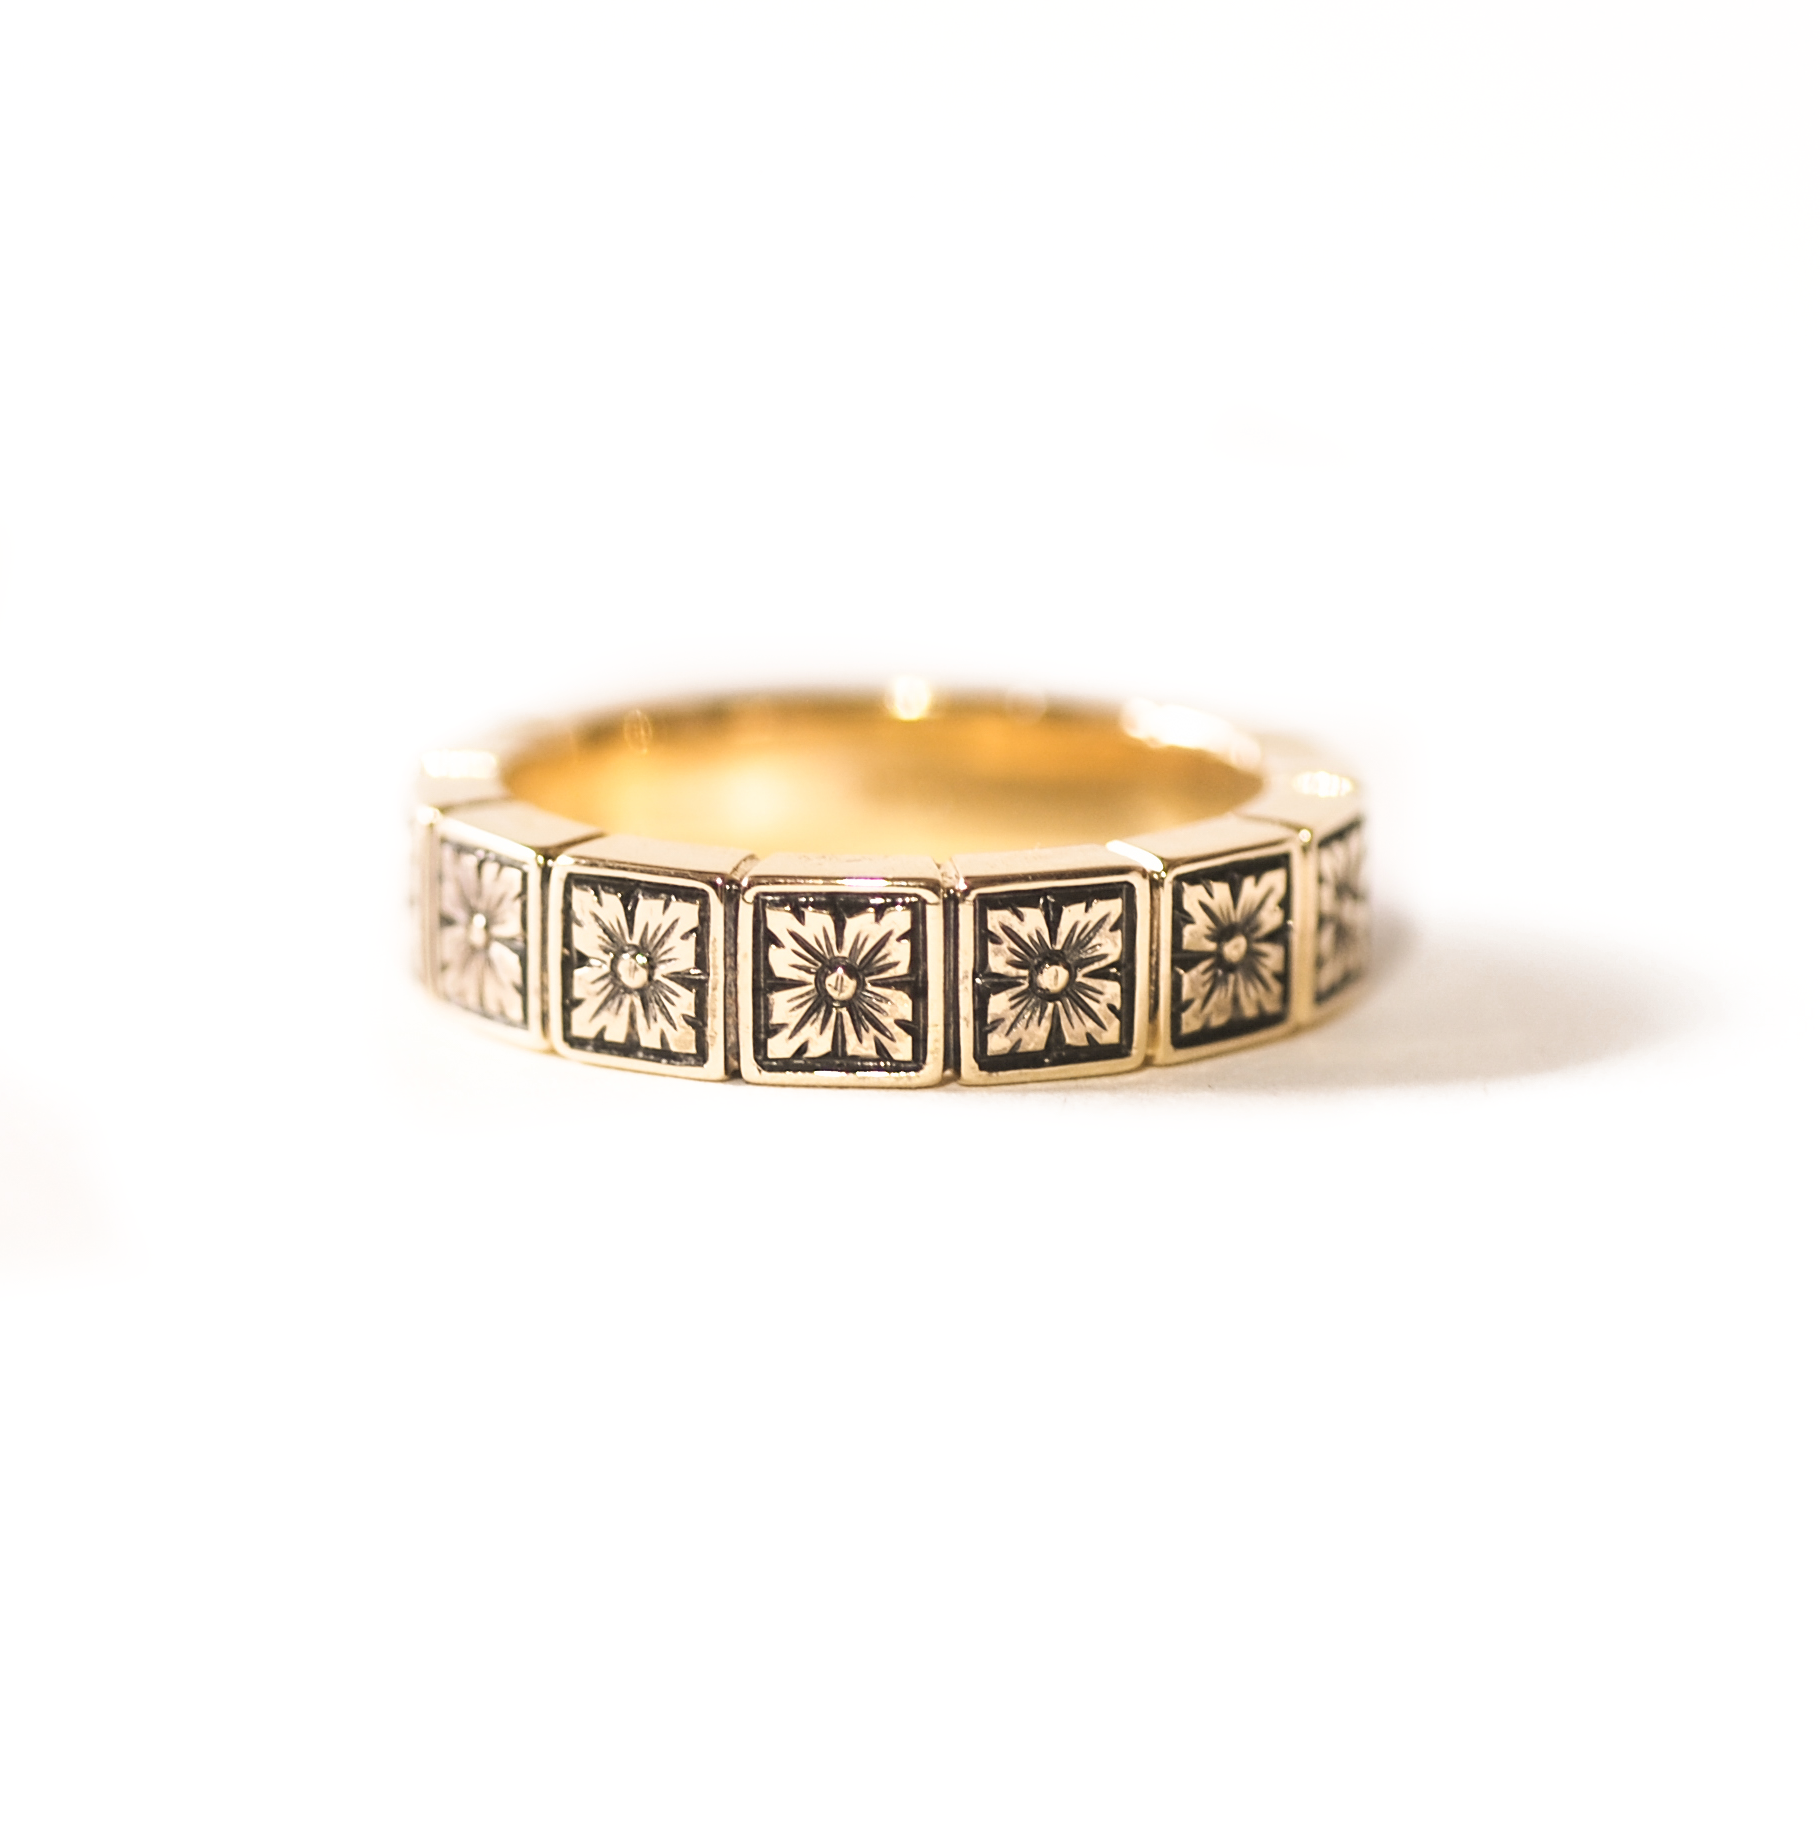 5mm Art Deco Engraved Notched Band Ring